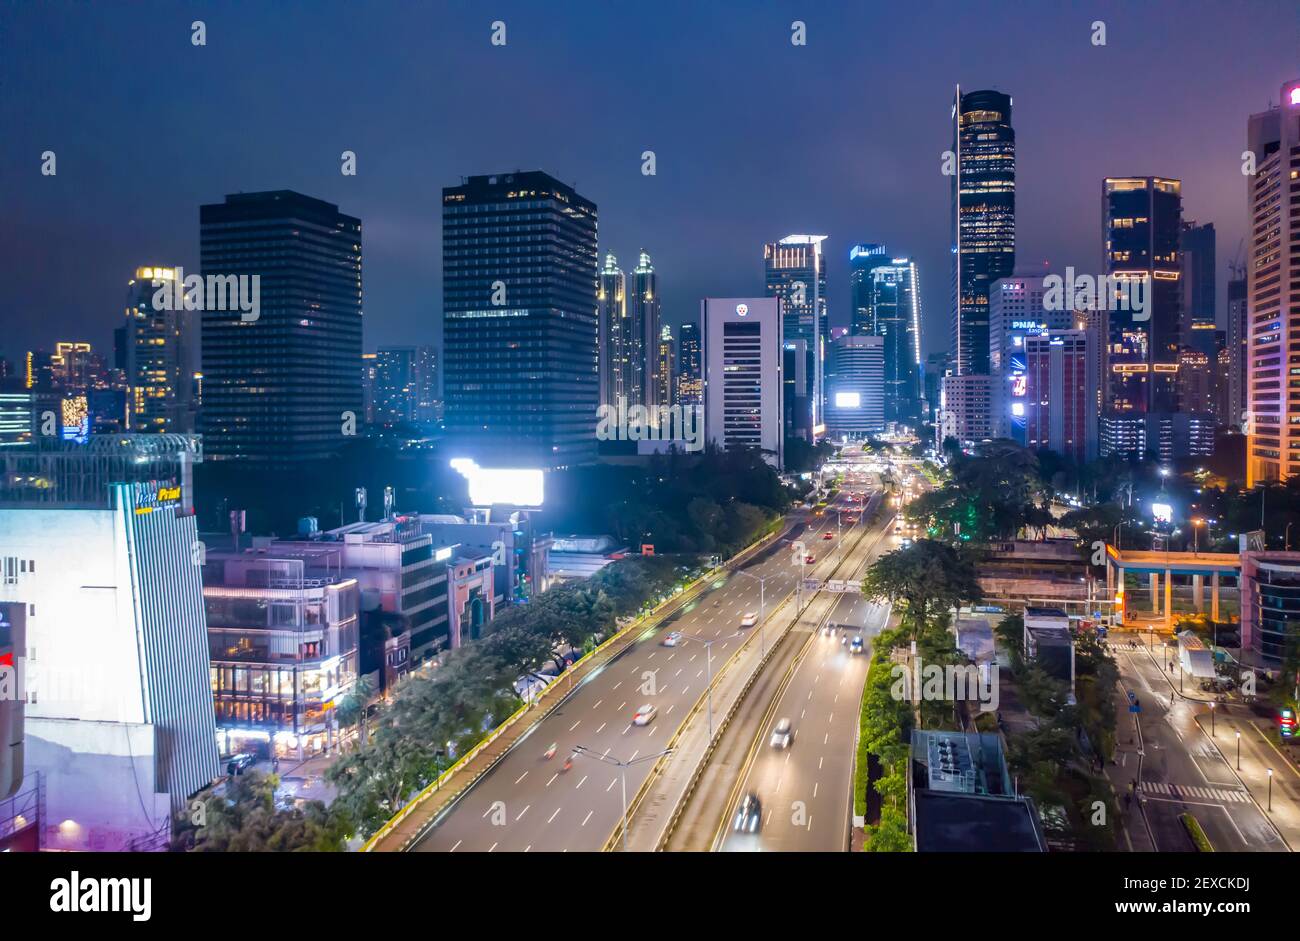 View of fast night time traffic through modern urban city center with skyscrapers in Jakarta, Indonesia Aerial view of multi lane highway through the city Stock Photo